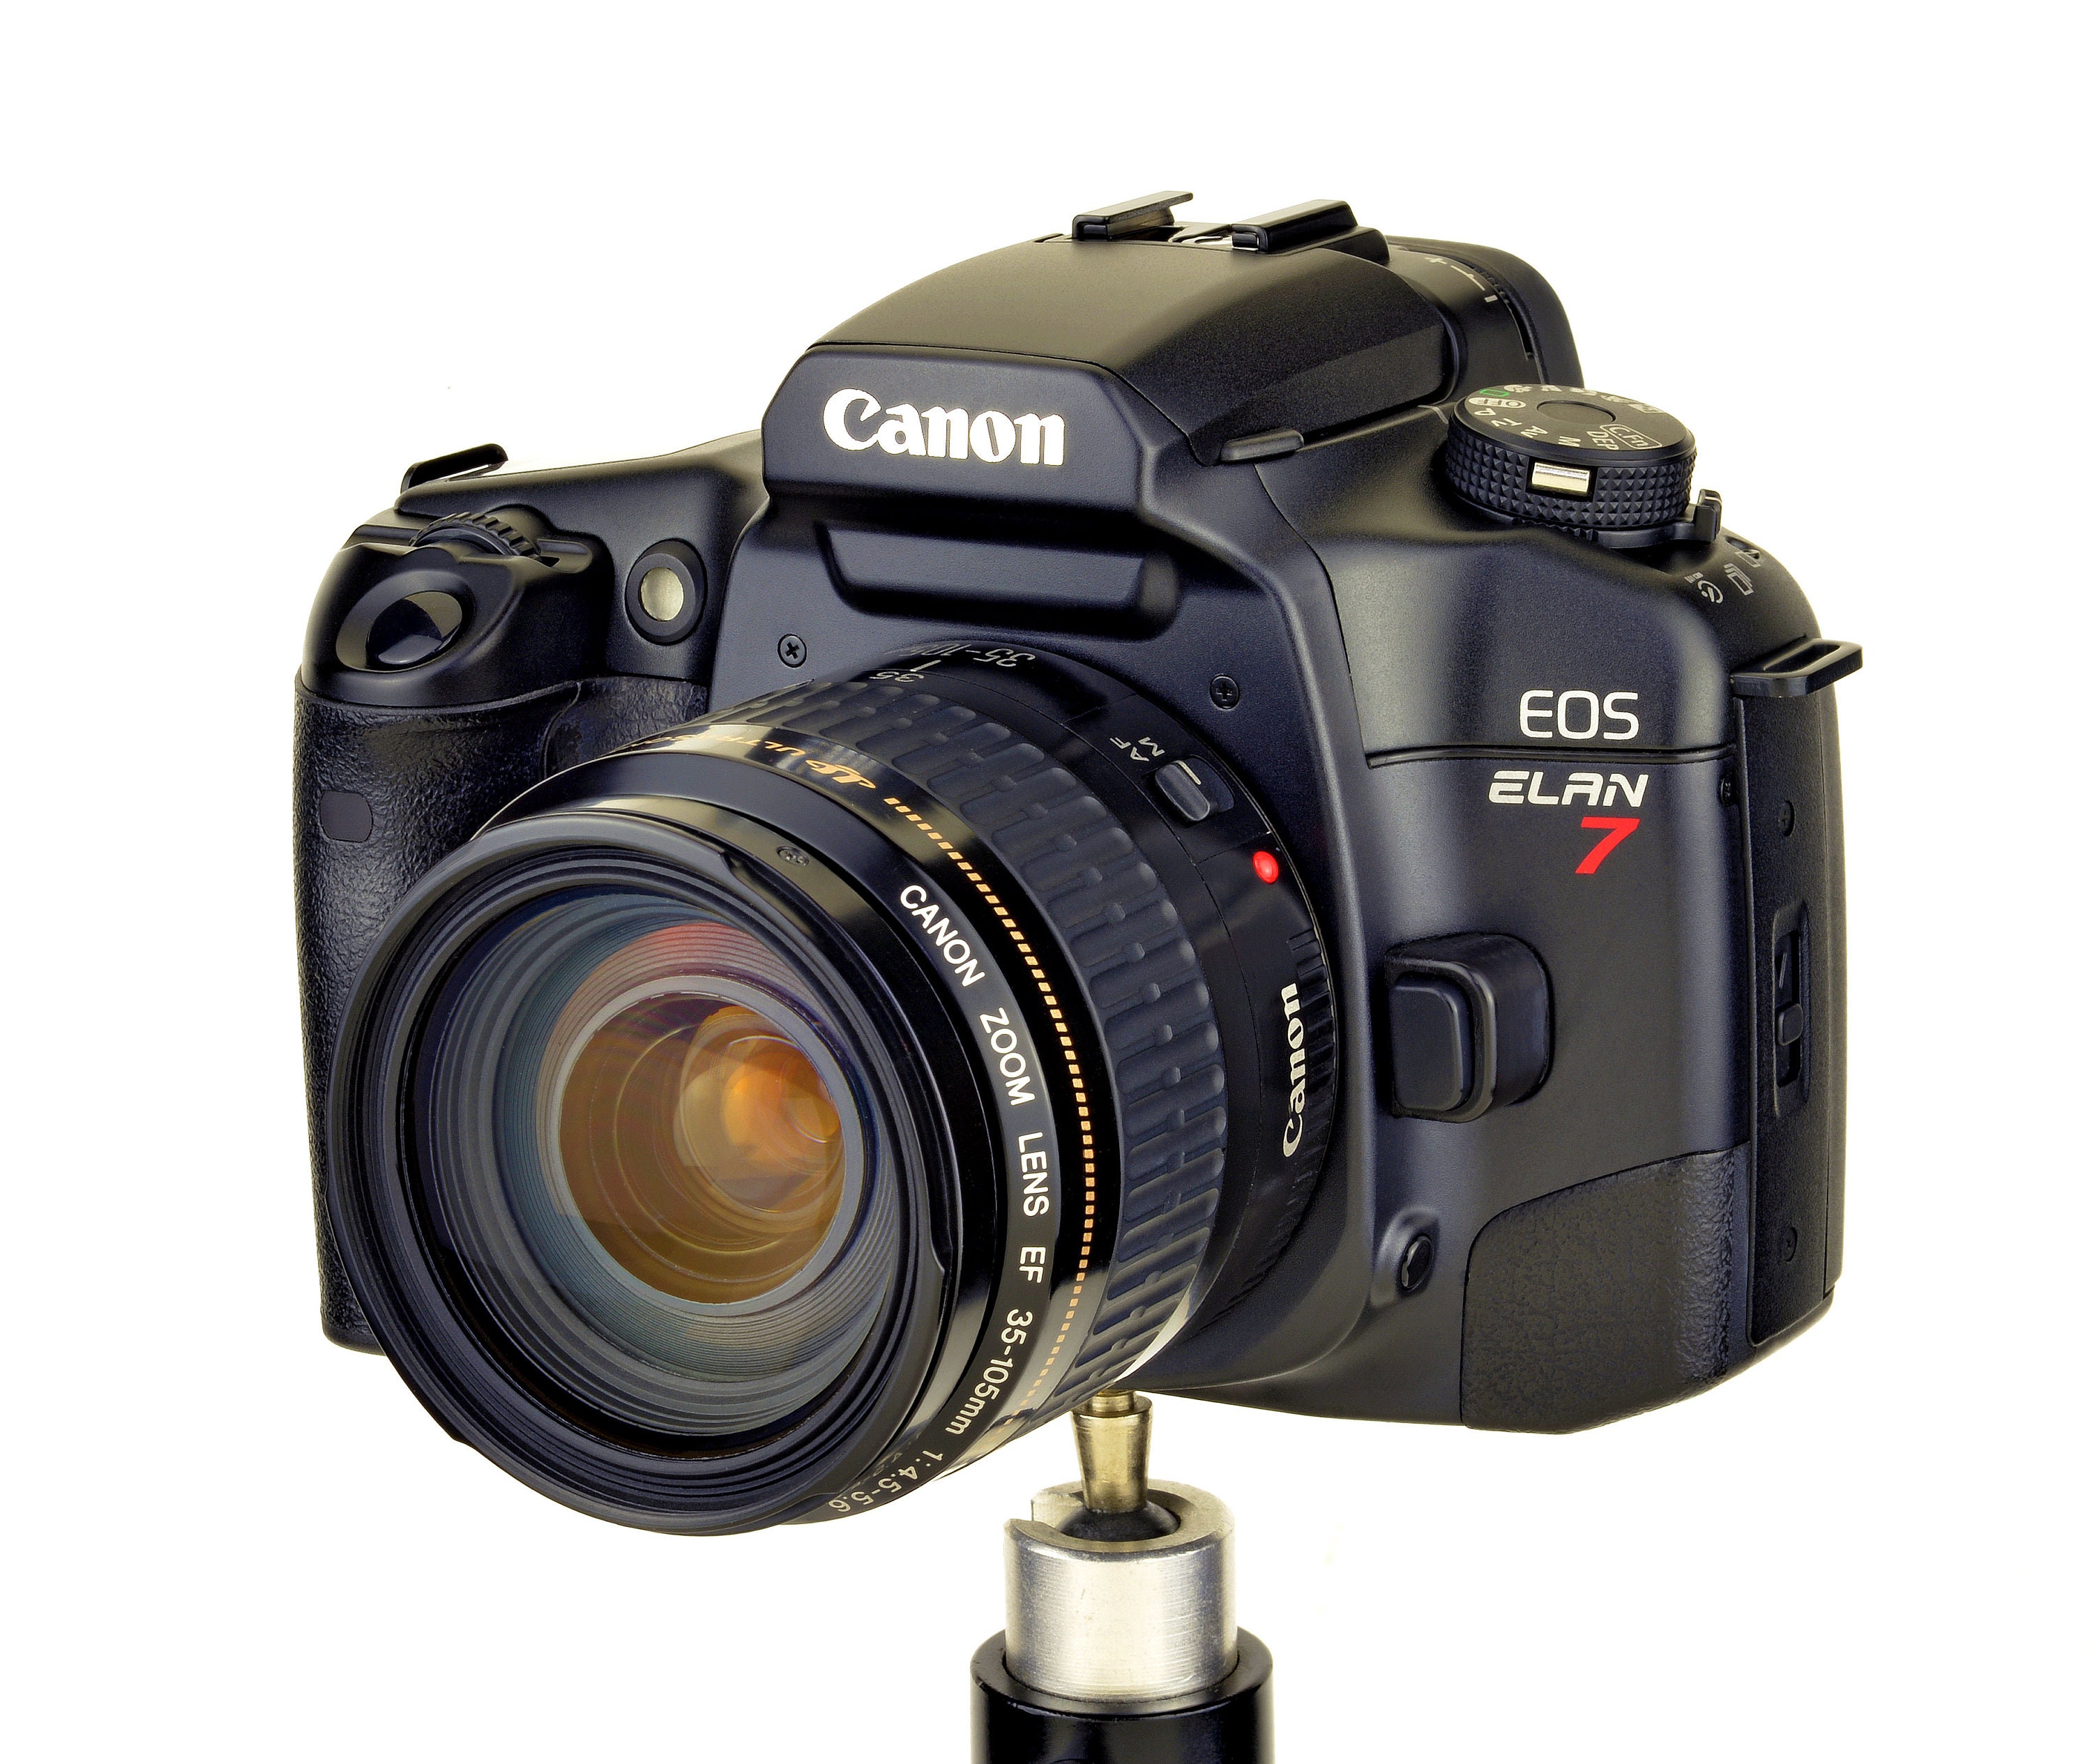 Students: Canon Eos Elan 7 With Canon EF 35-105mm F/4.5-5.6 USM ...